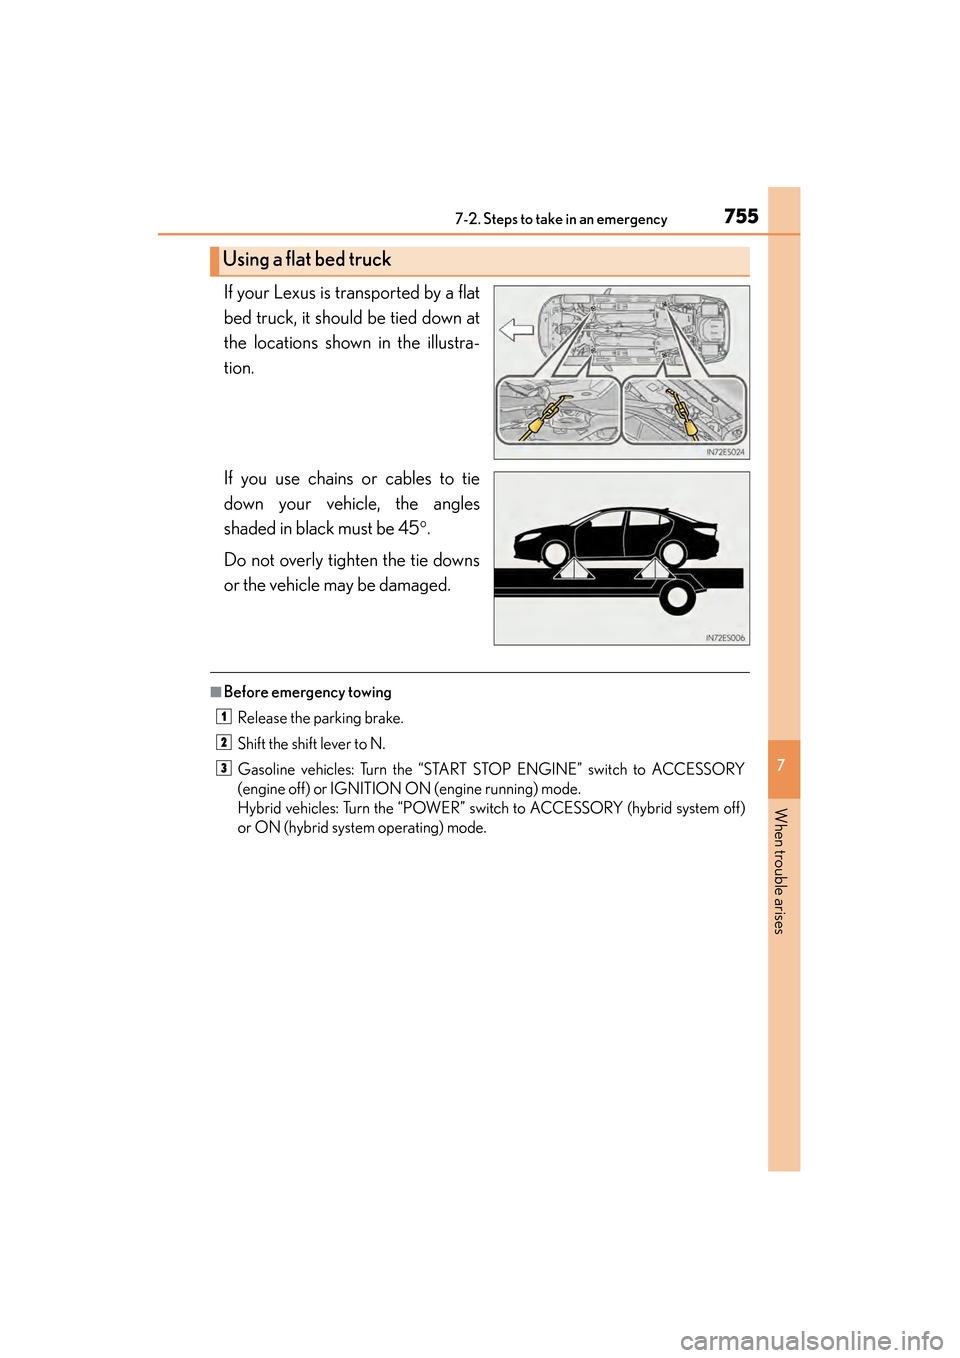 Lexus ES300h 2014  Owners Manual 7557-2. Steps to take in an emergency
ES350_300h_OM_OM33A60U_(U)
7
When trouble arises
If your Lexus is transported by a flat
bed truck, it should be tied down at
the locations shown in the illustra-
